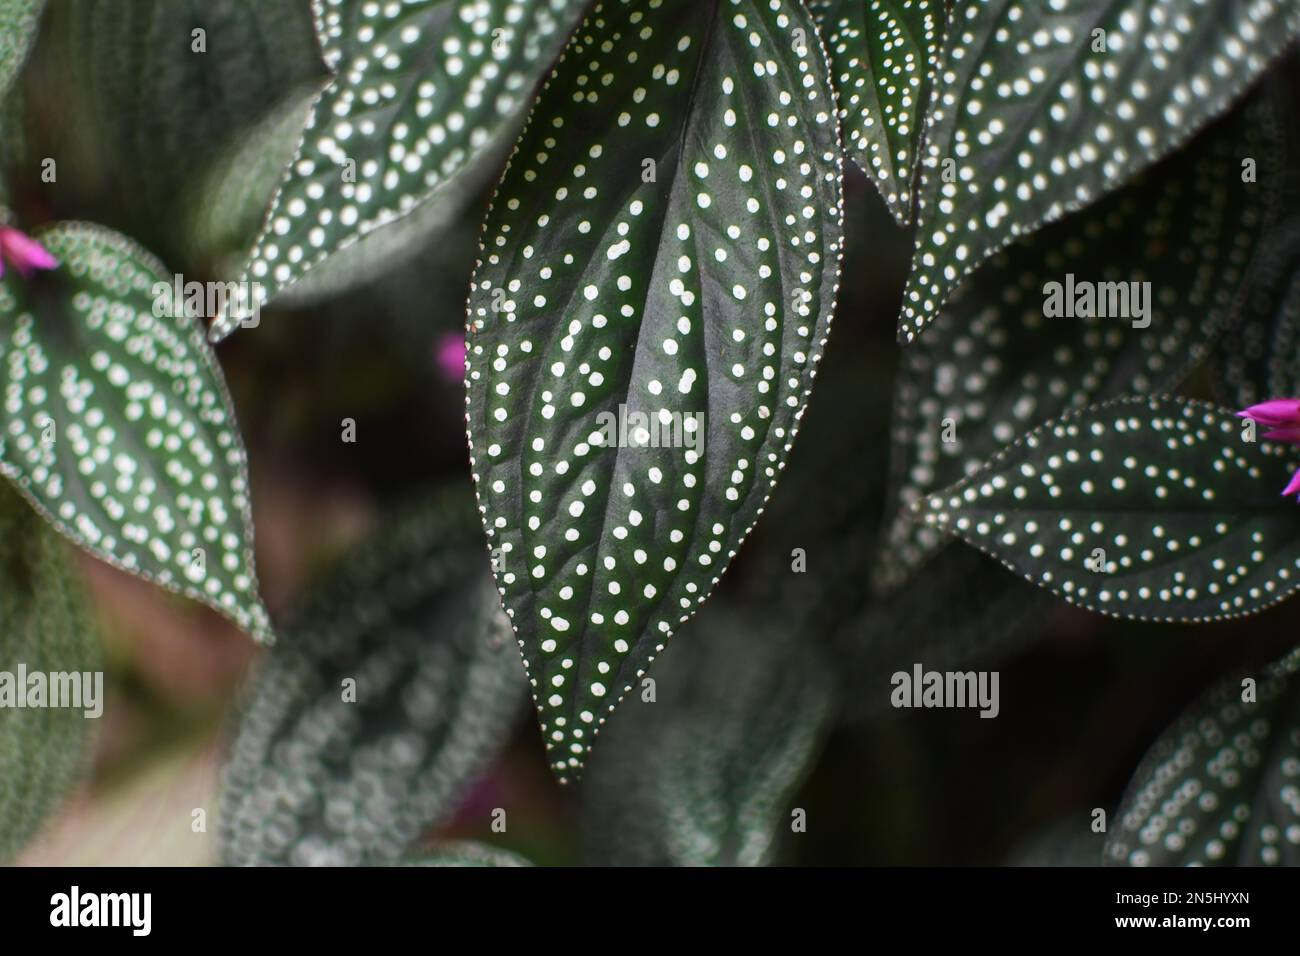 Close-up on the polka-dot patterned leaves of polka-dot begonia houseplant. Unique houseplant detail. Stock Photo